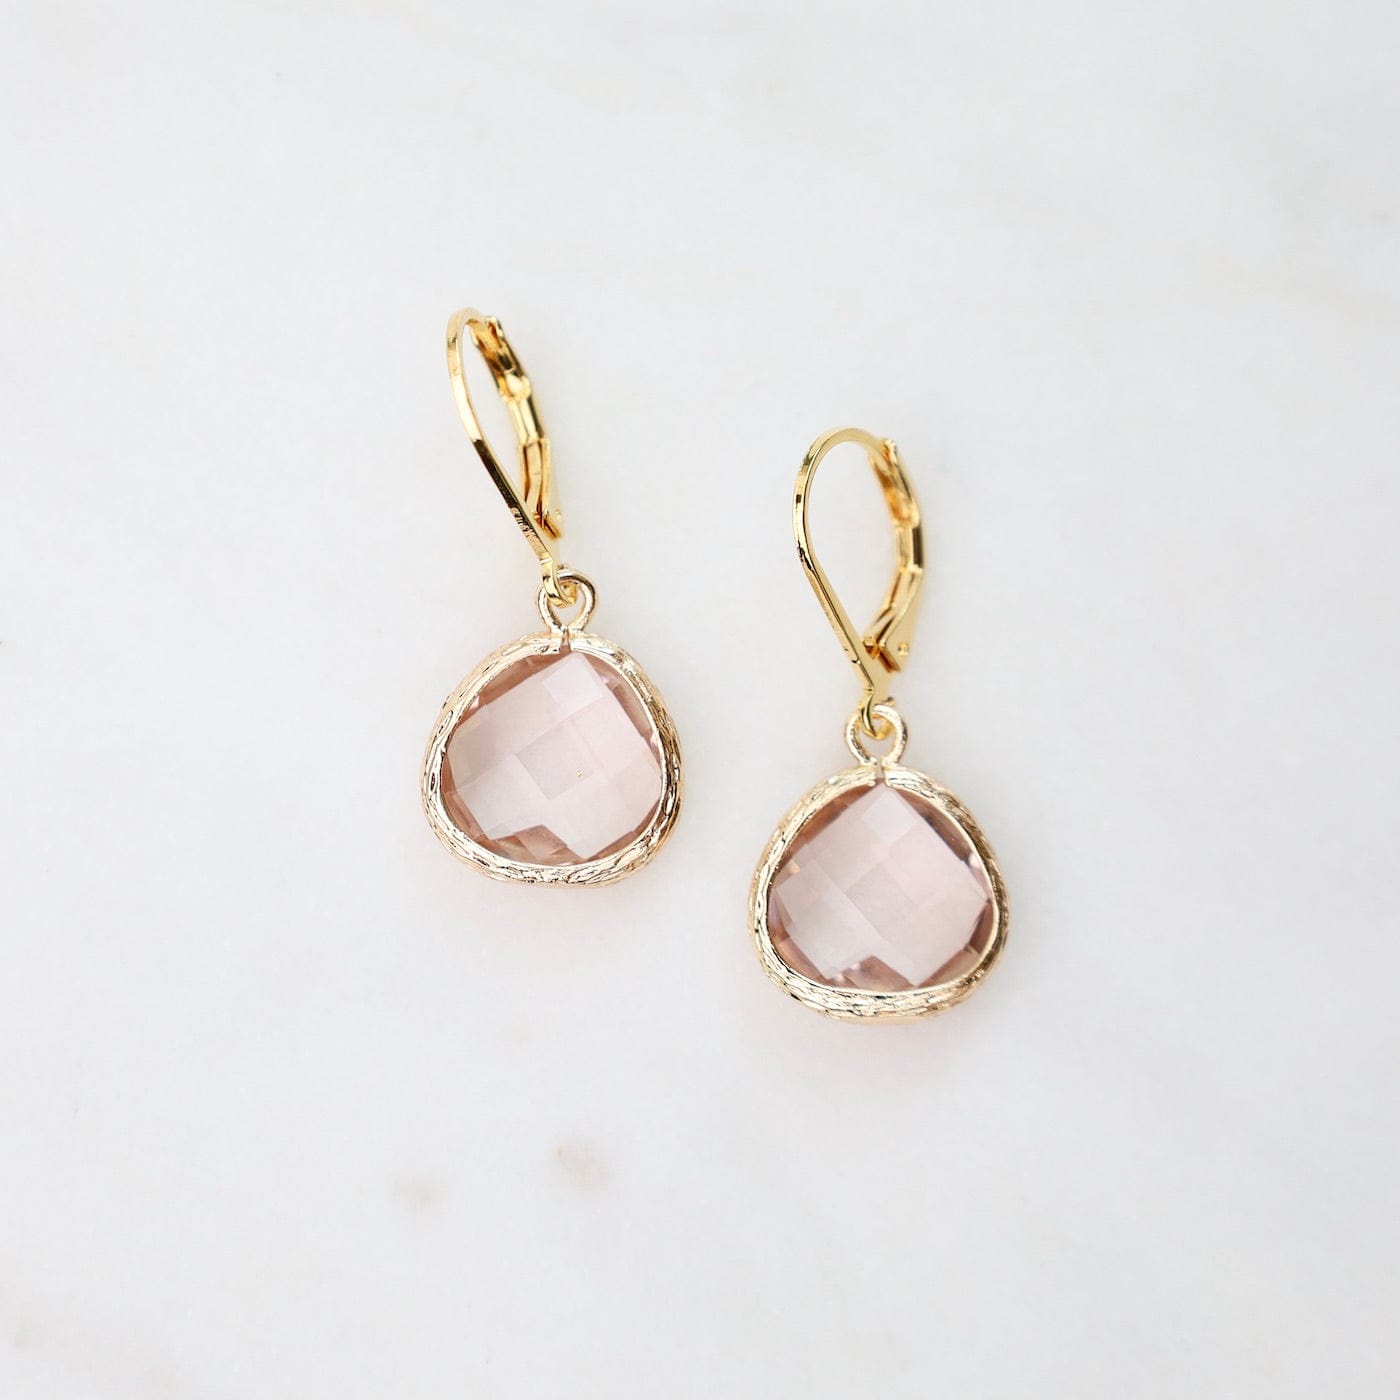 Load image into Gallery viewer, EAR-GPL Gold Plated Crystal Lever Back Earrings - Peach
